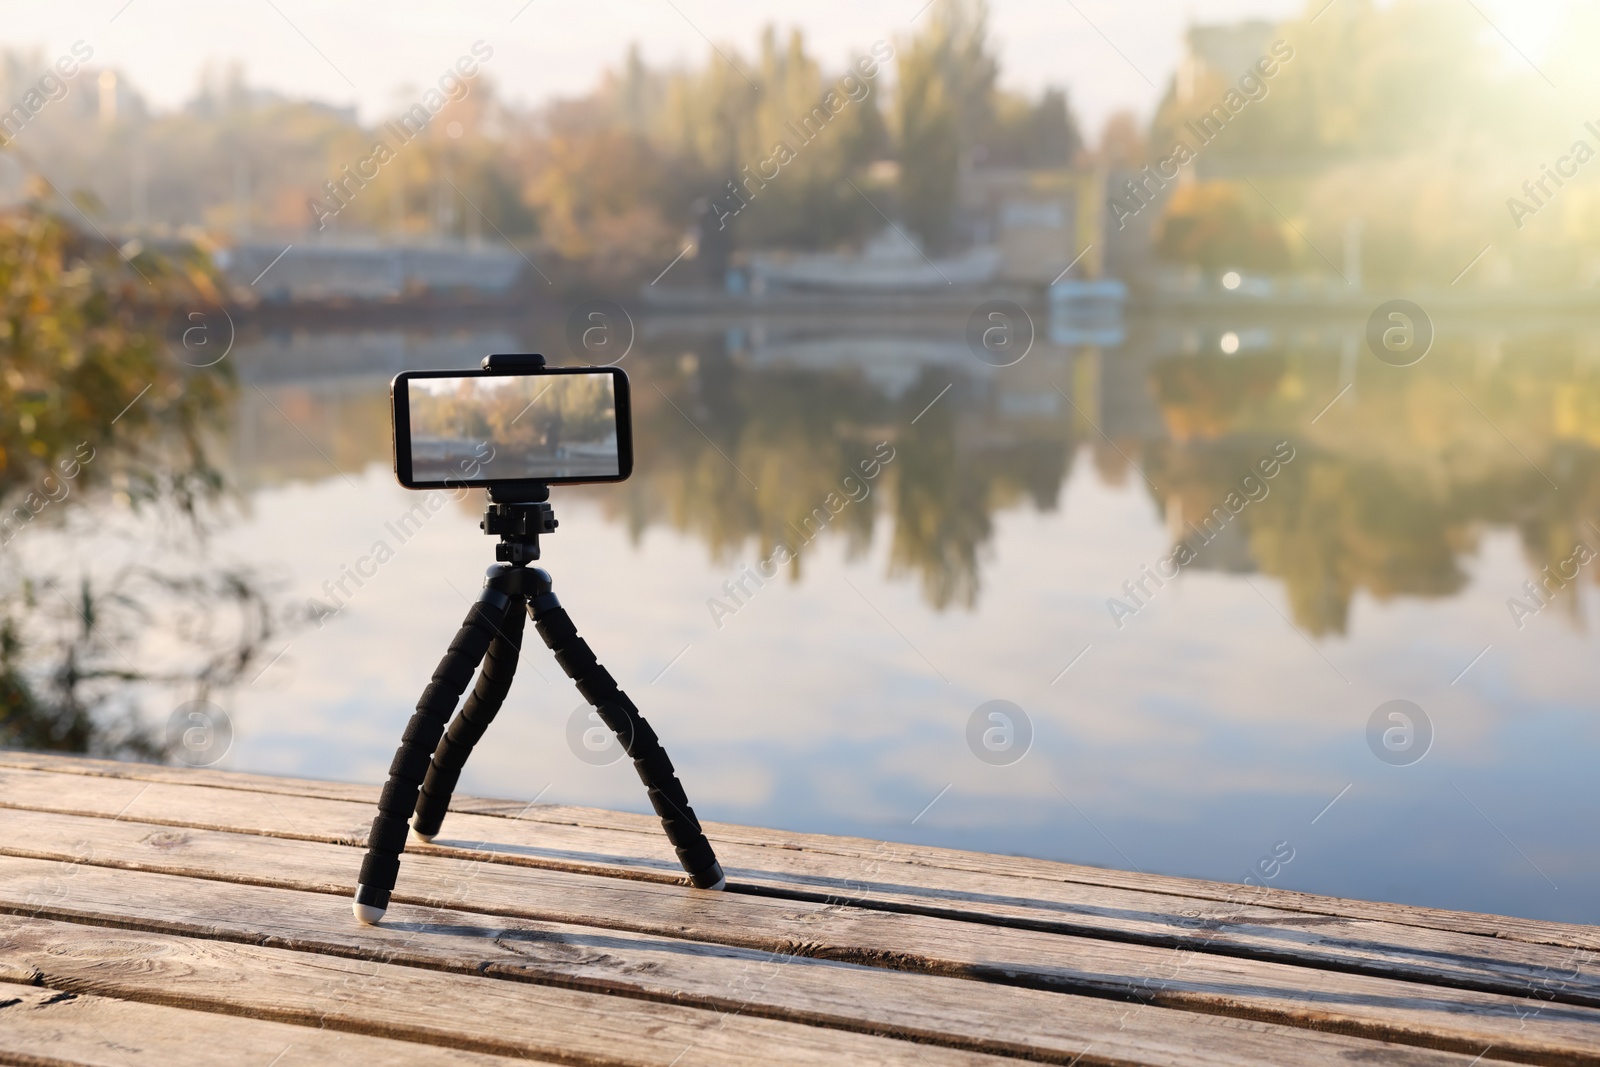 Photo of Tripod with smartphone on wooden pier near river